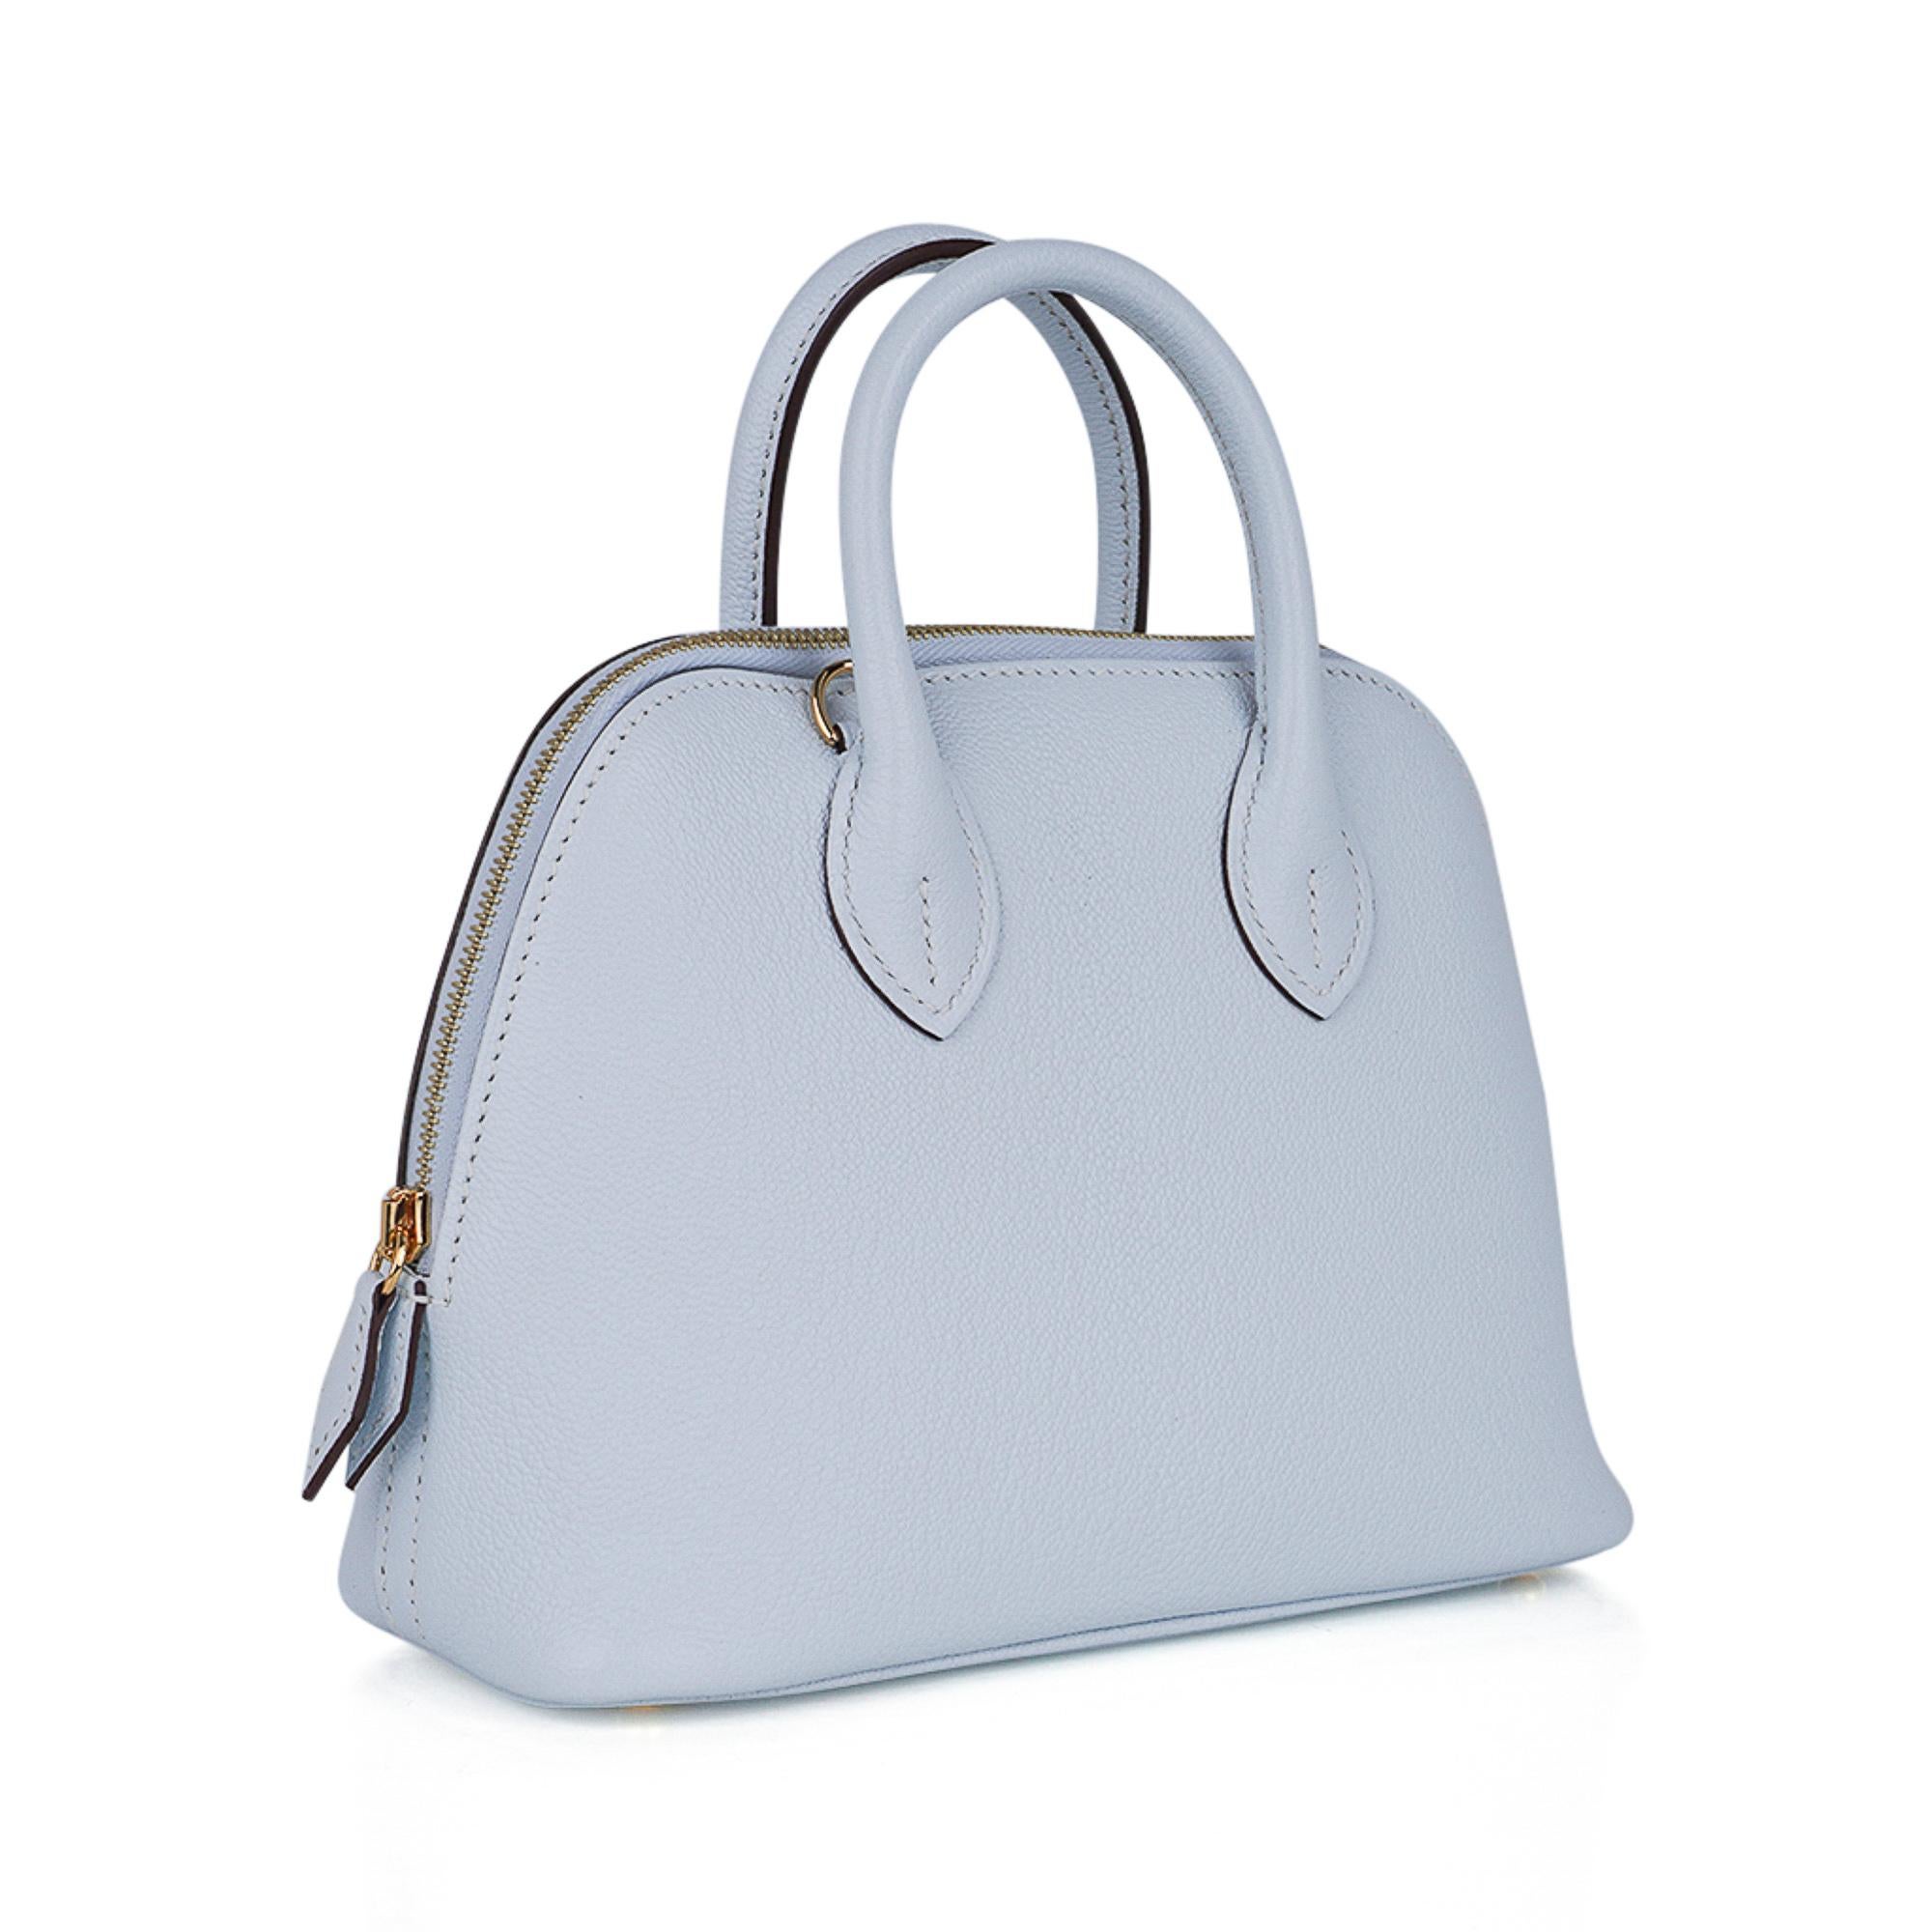 Mightychic offers an Hermes Mini Bolide 1923 featured in stunning Blue Brume. This is a collectors bag!
Charming 'baby' Bolide is a fabulous day to evening treasure.
Exquisite in Evercolor leather with gold hardware.
Comes with strap and